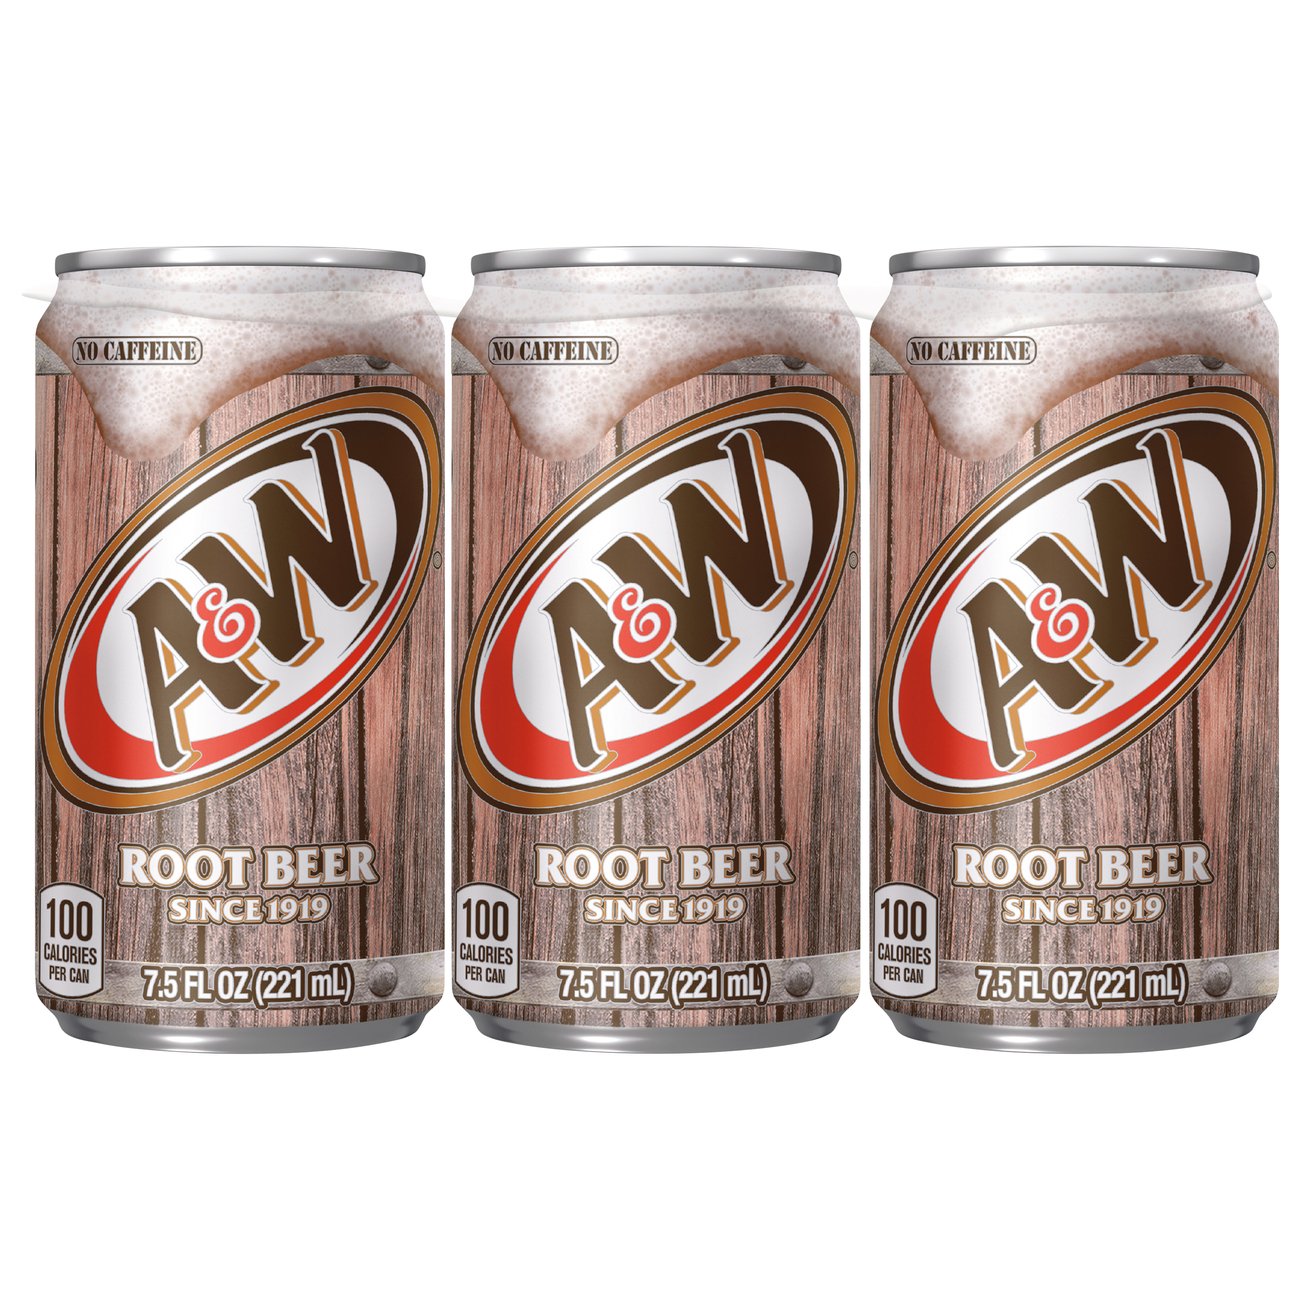 A&W Root Beer 7.5 oz Cans - Shop Soda at H-E-B